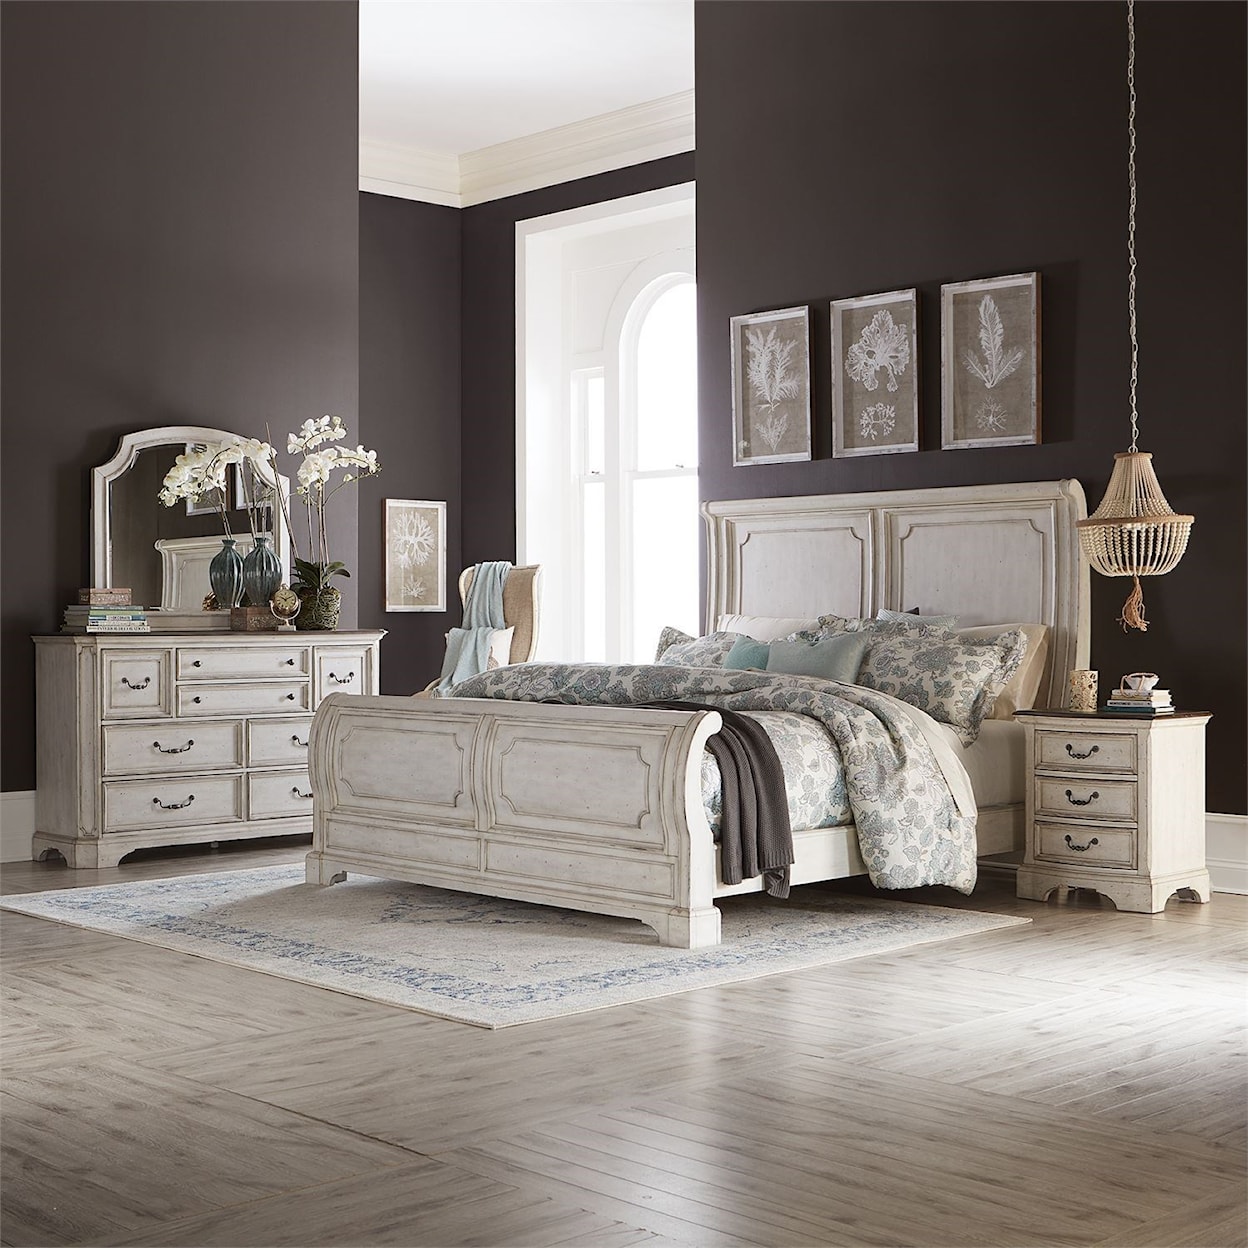 Liberty Furniture Abbey Road California King Bedroom Group